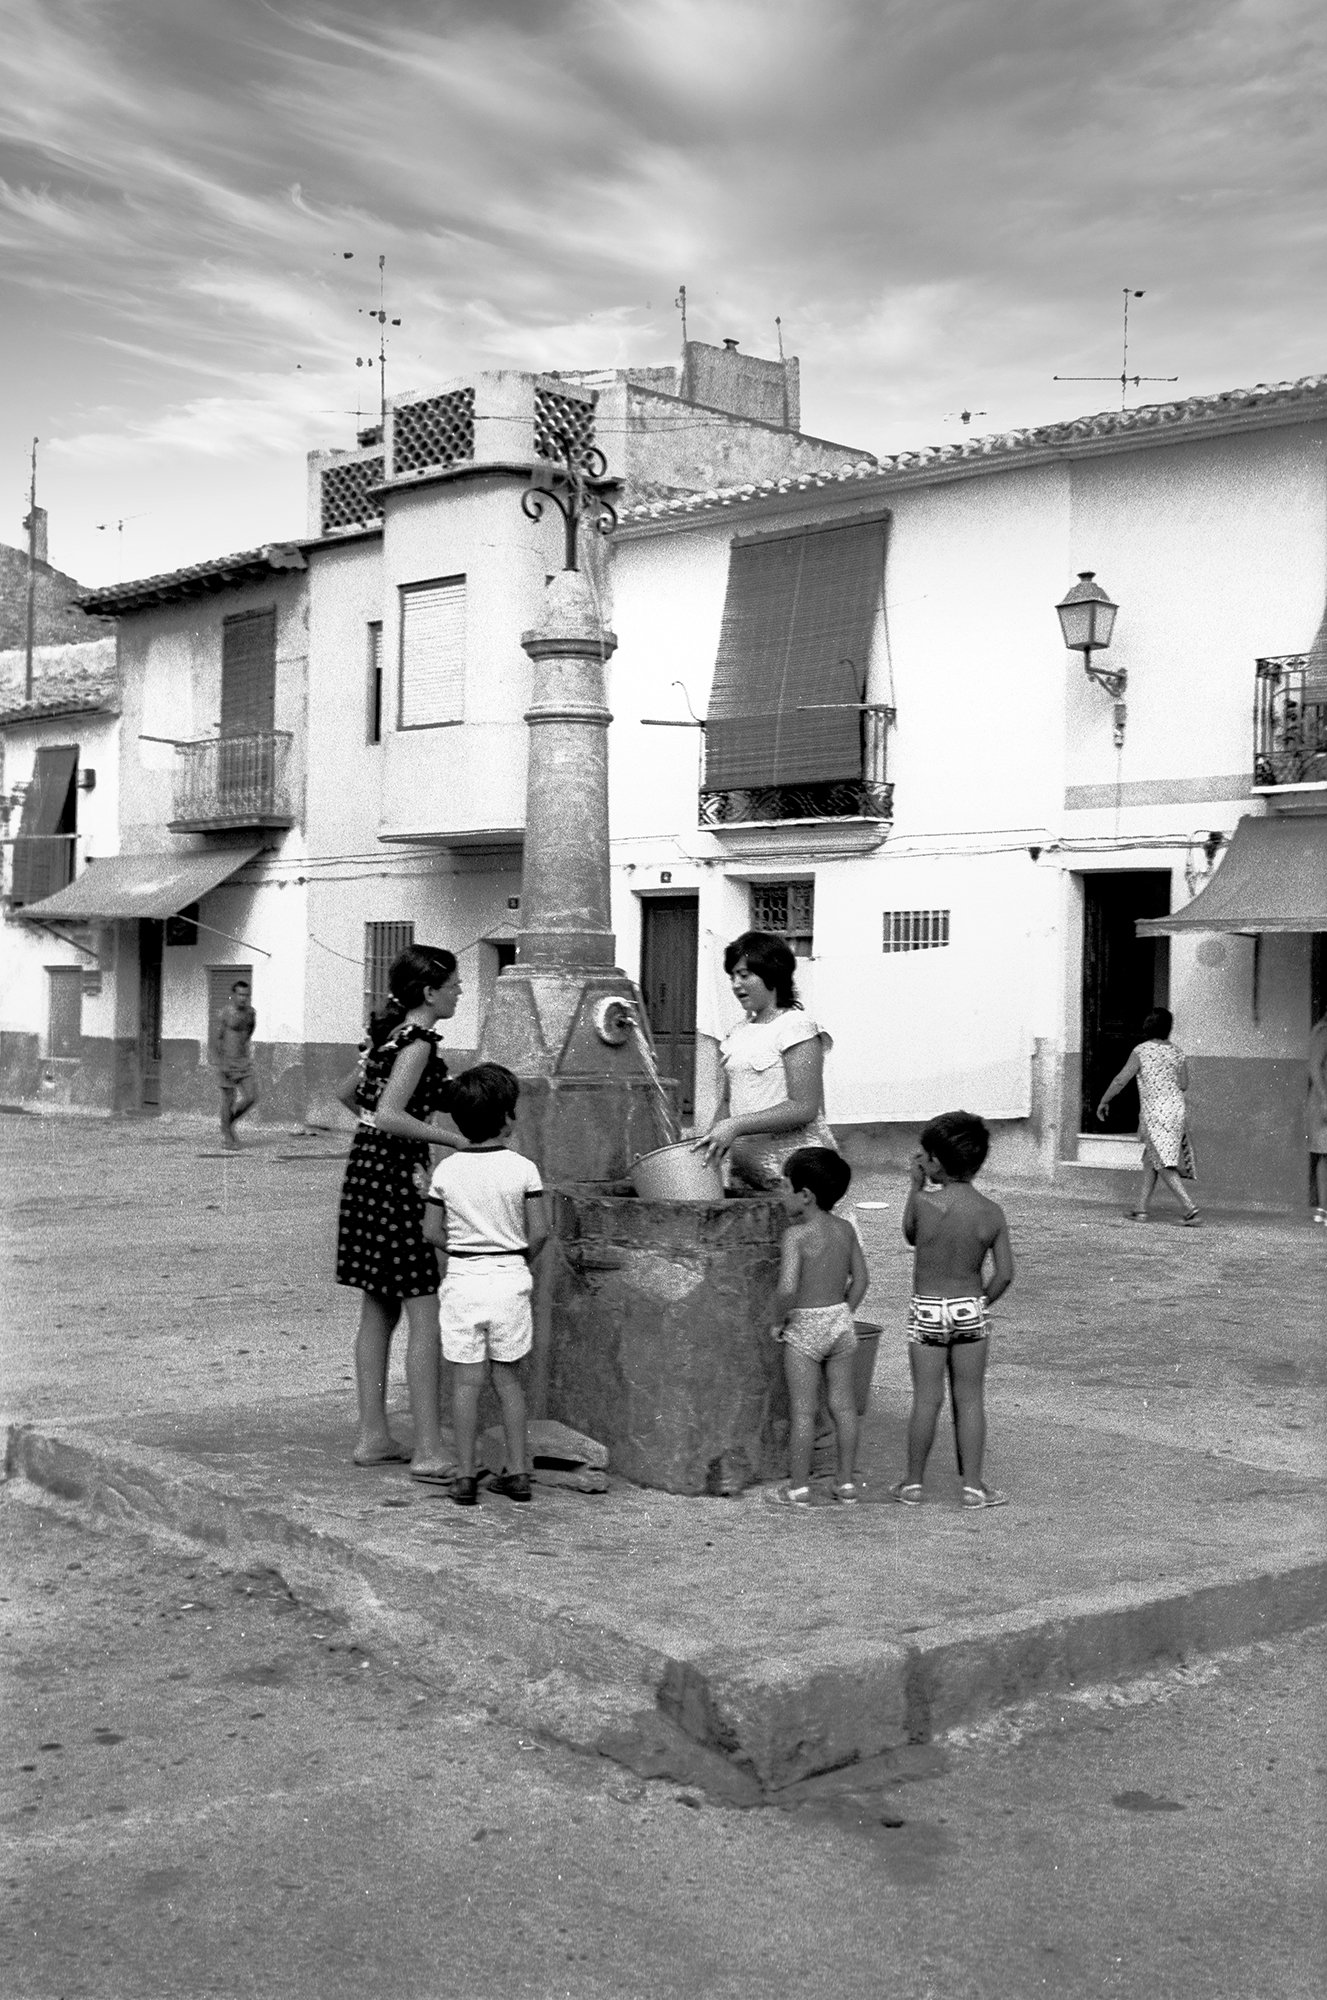 A water wells in the coastal town of Villajoyosa in the Province of Alicante in the sixties Photography Pierre Toutain-Dorbec.jpg